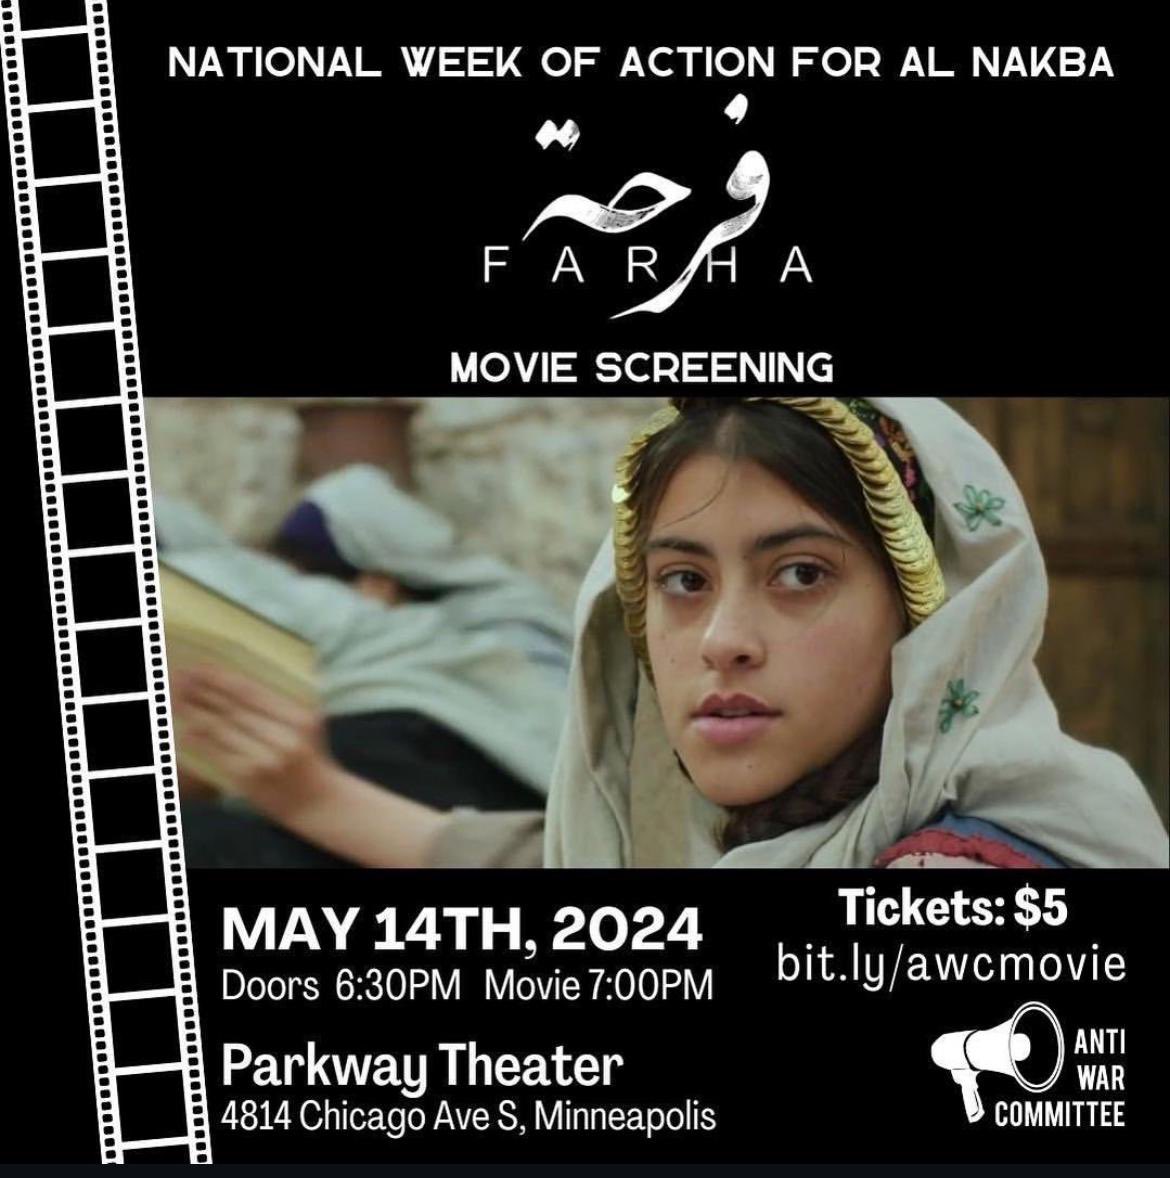 TOMORROW: Join us for a screening of “Farha” (2022) ahead of the Nakba commemoration. 🗓️Tues 5/14 ⏰Doors 6:30pm/movie 7pm 📍Parkway Theater (4814 Chicago Ave) Synopsis: A Palestinian girl’s dream is shattered by the development of the Nakba. TICKETS: eventbrite.com/e/anti-war-com…